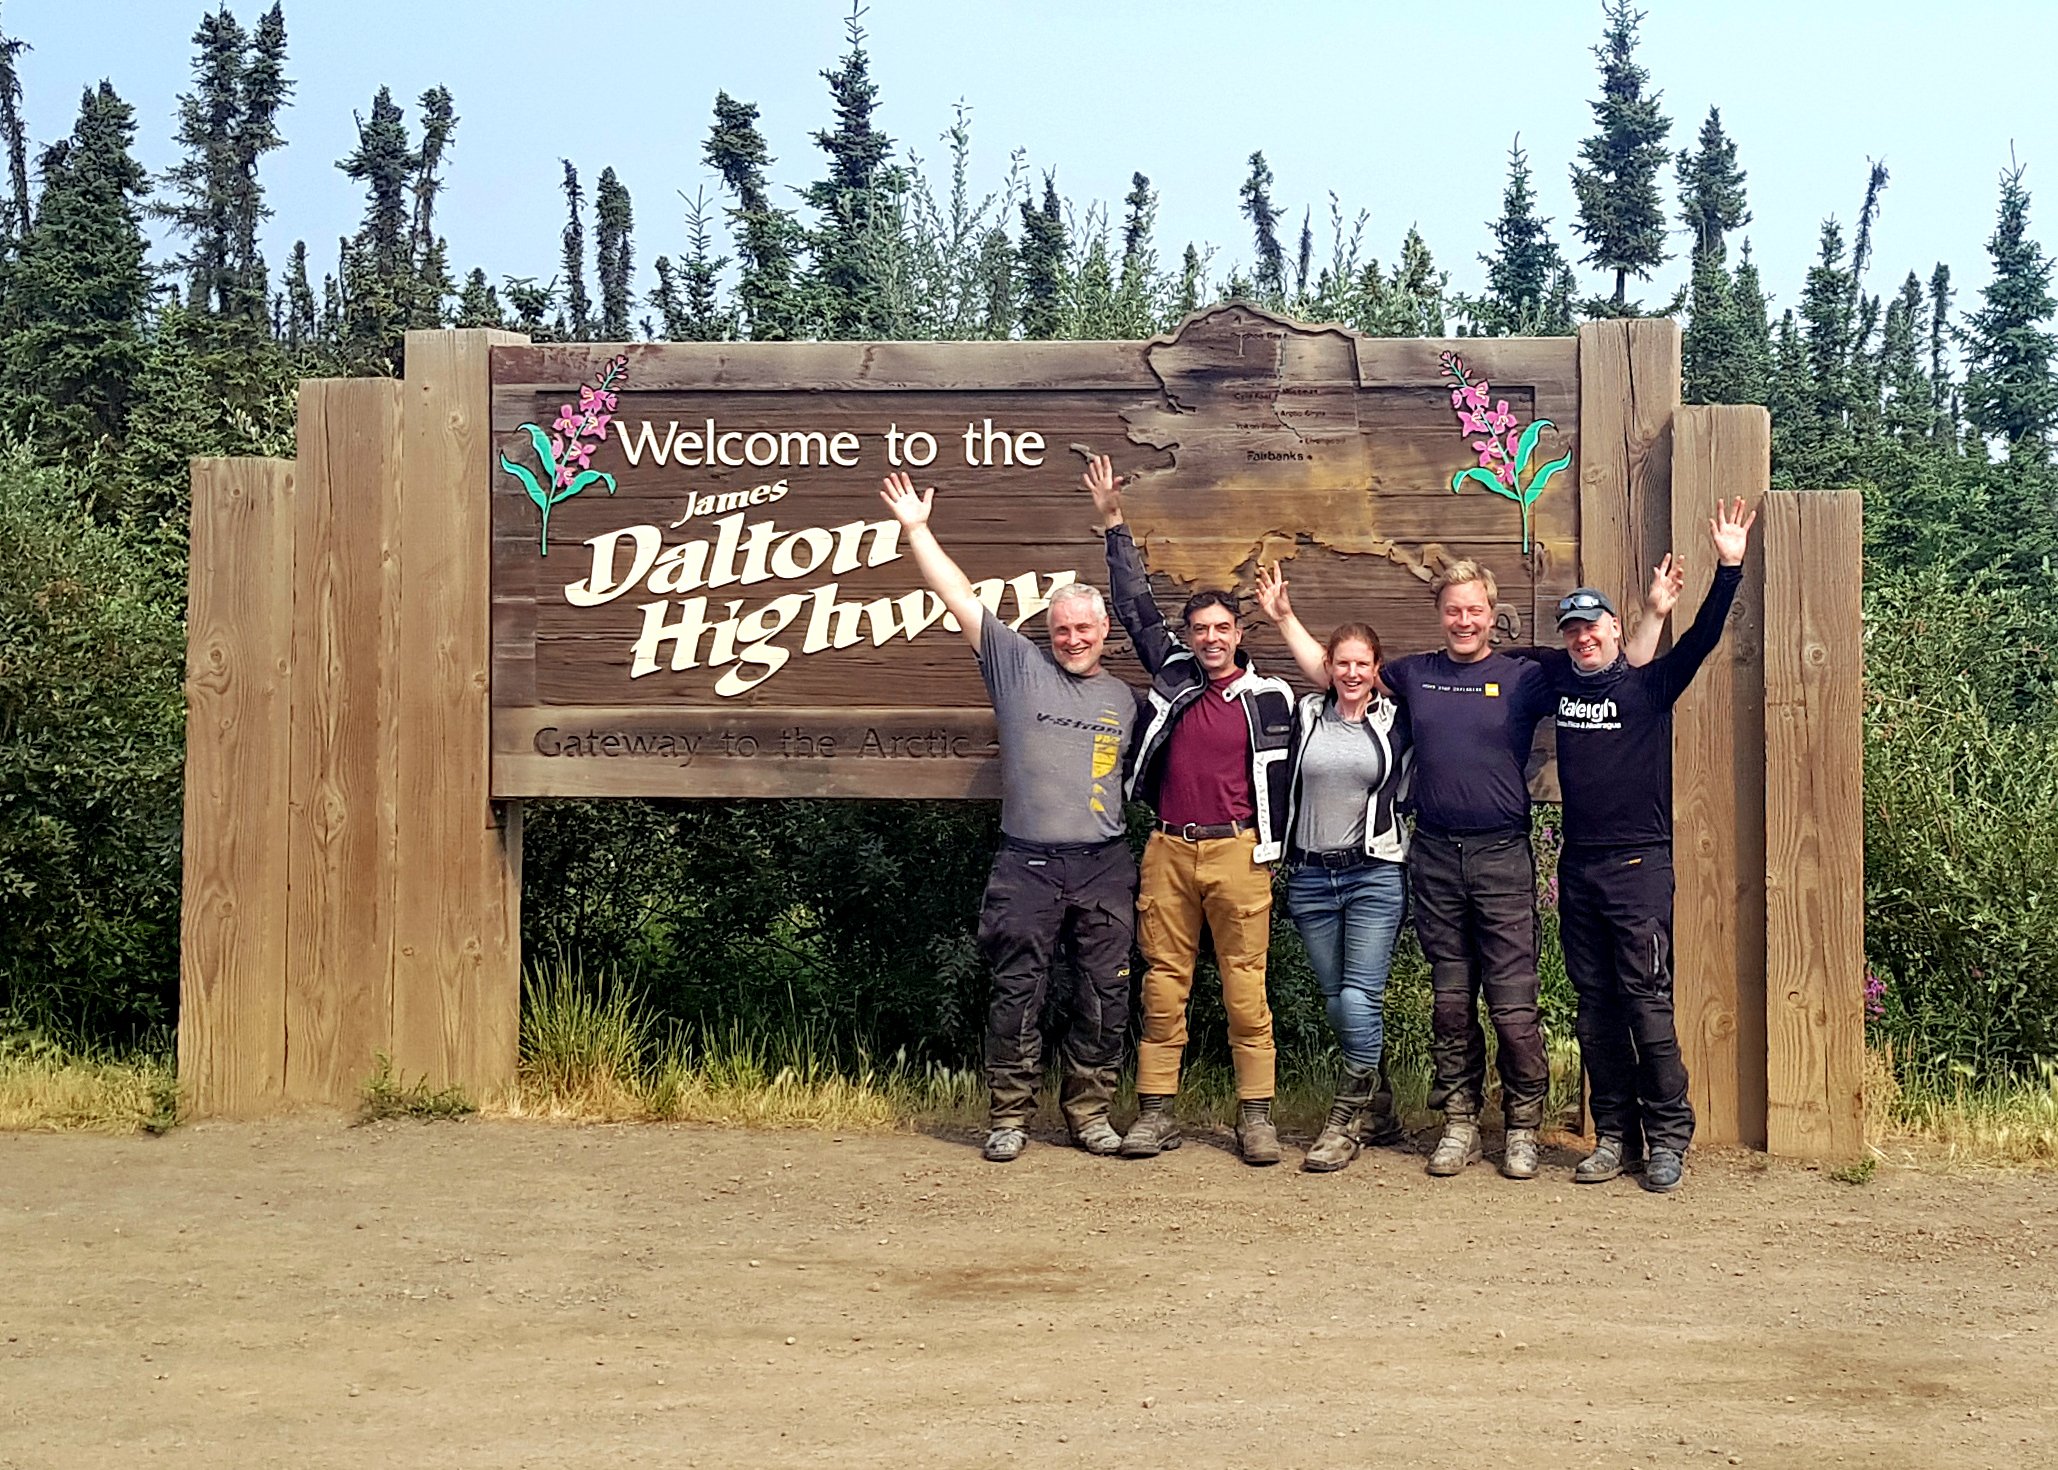  Having ridden together for all or most of the Dalton, and joining up for dinner in Coldfoot and Deadhorse, the “Dalton Dinner Club” celebrates their accomplishment. 